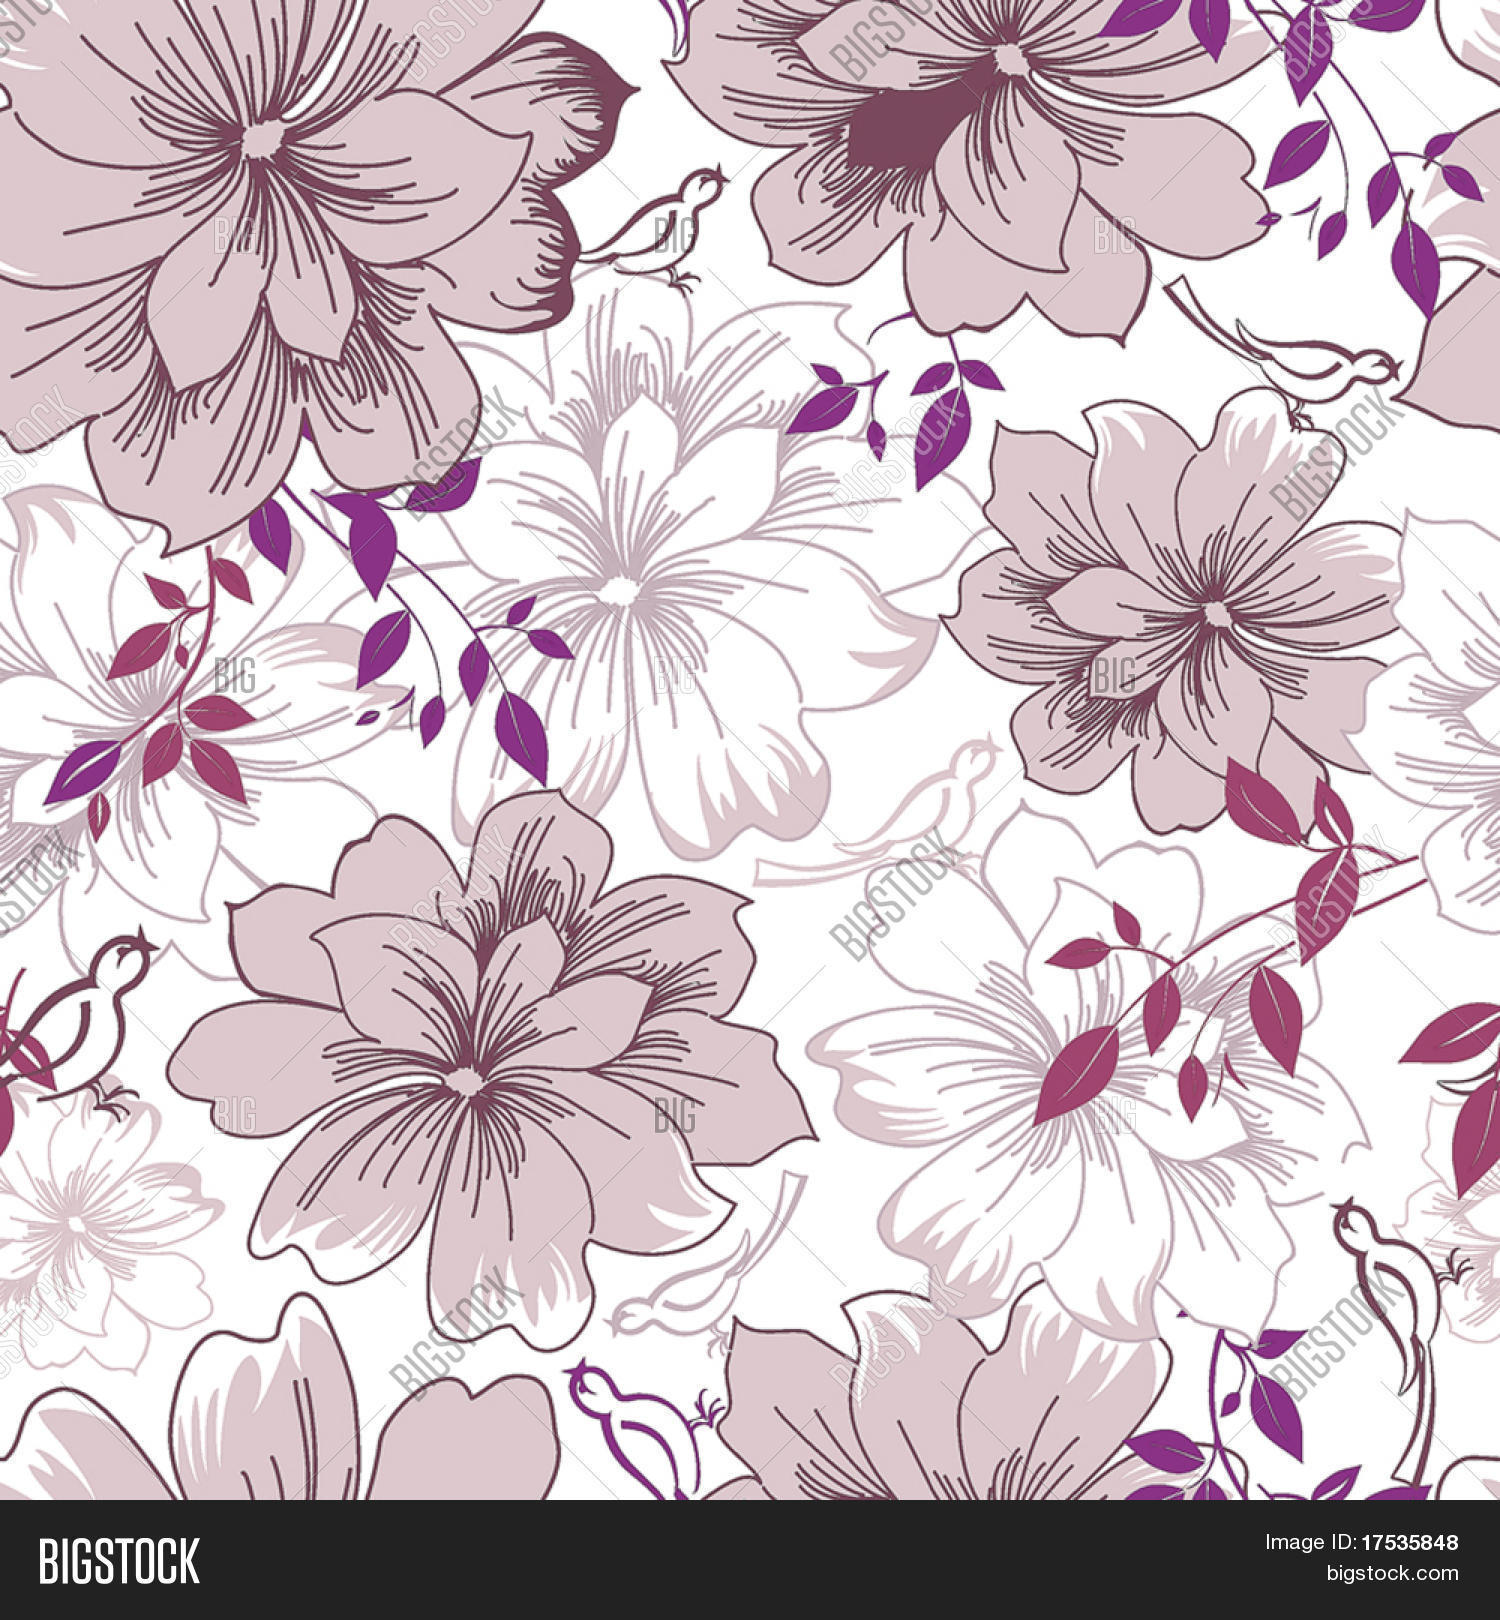 Abstract Elegance Seamless Floral Vector & Photo | Bigstock